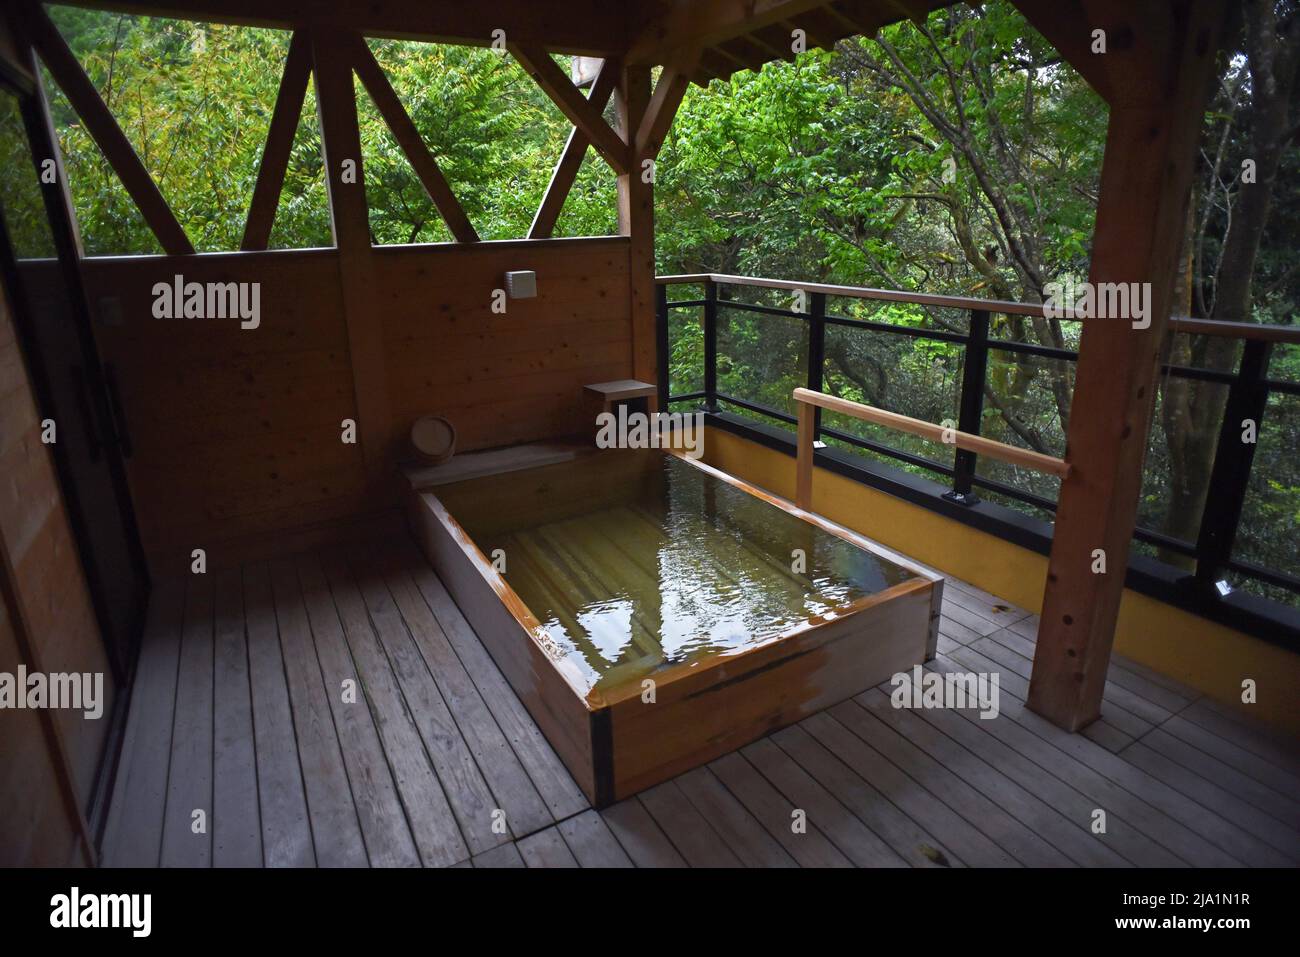 The Kayotei, located in Yamanaka Onsen, is considered one of the four best ryokan in Japan. Stock Photo